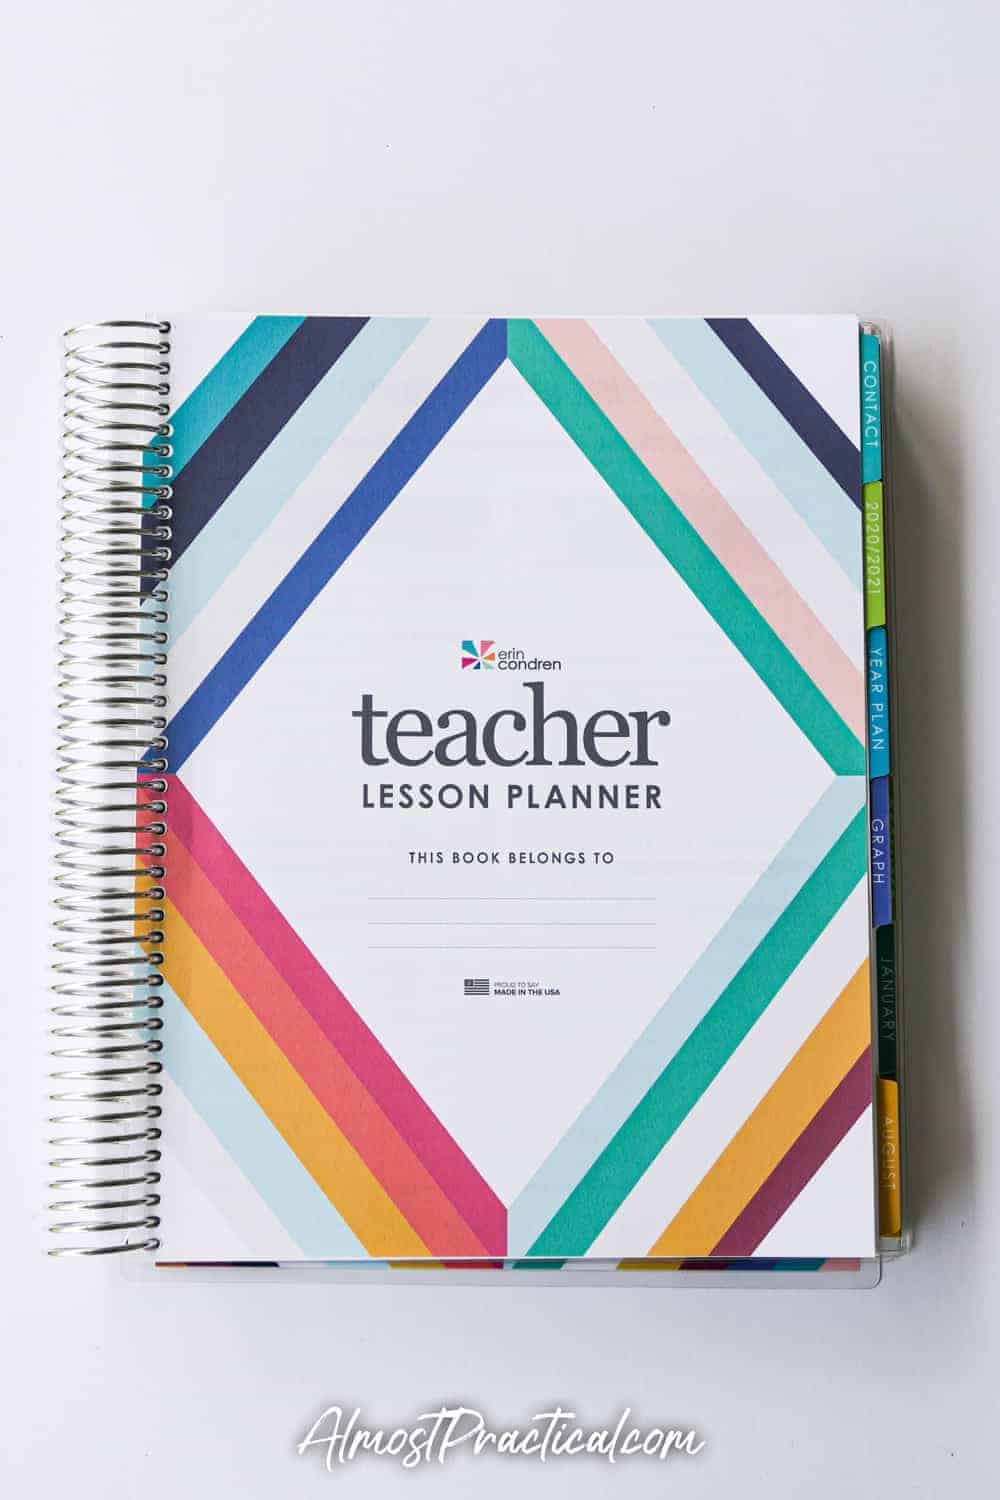 210 Pages of Planning Potential - Kaleidoscope Interior Design Month 2020-2021 Be The Hero Teacher Lesson Planner August 2020-July 2021 Erin Condren 12 